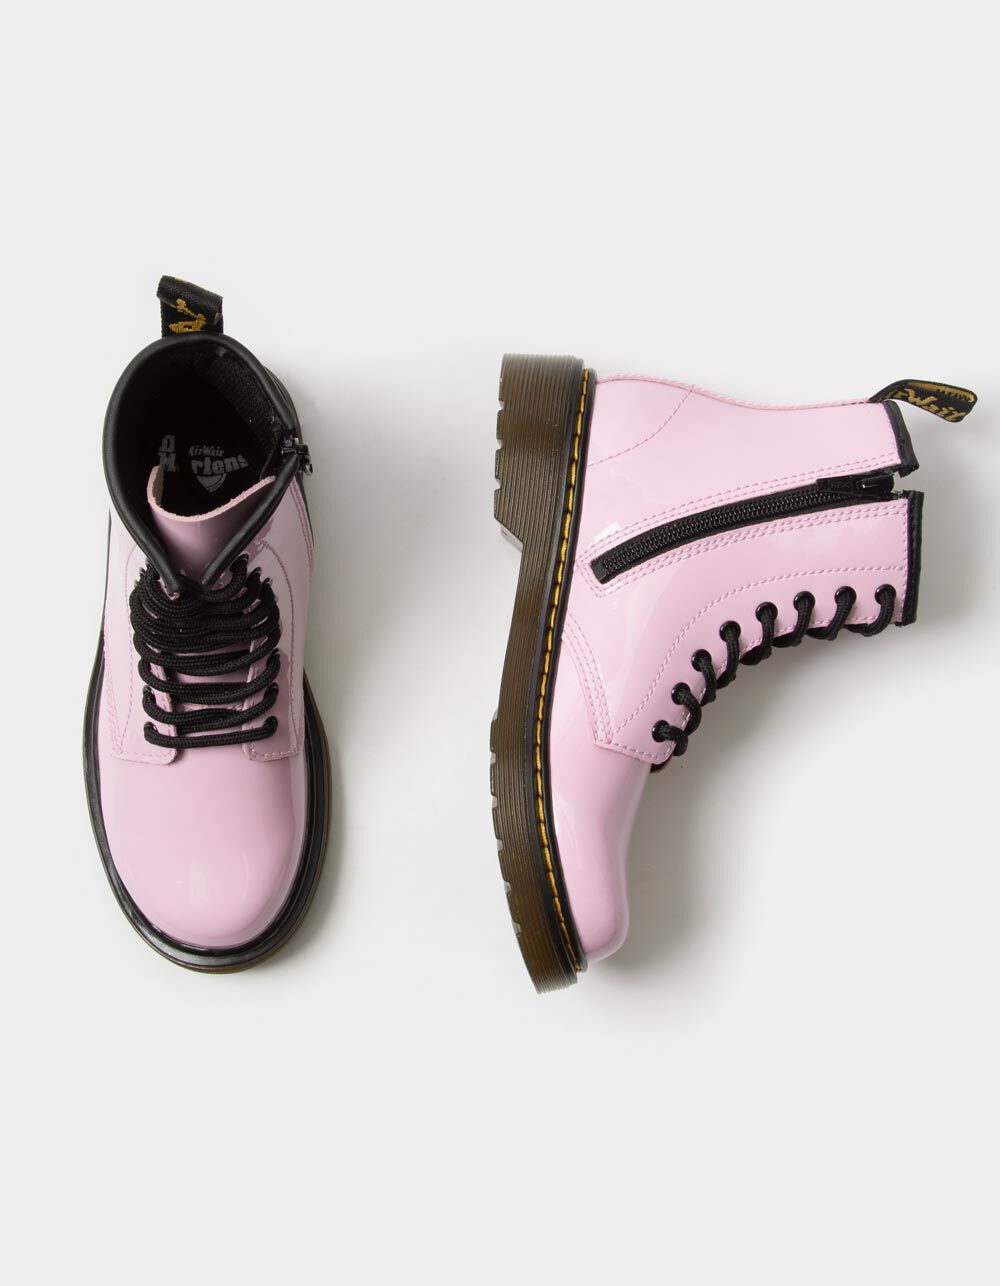 DR. MARTENS 1460 Patent Leather Girls Lace Up Boots - BLUSH | Tillys